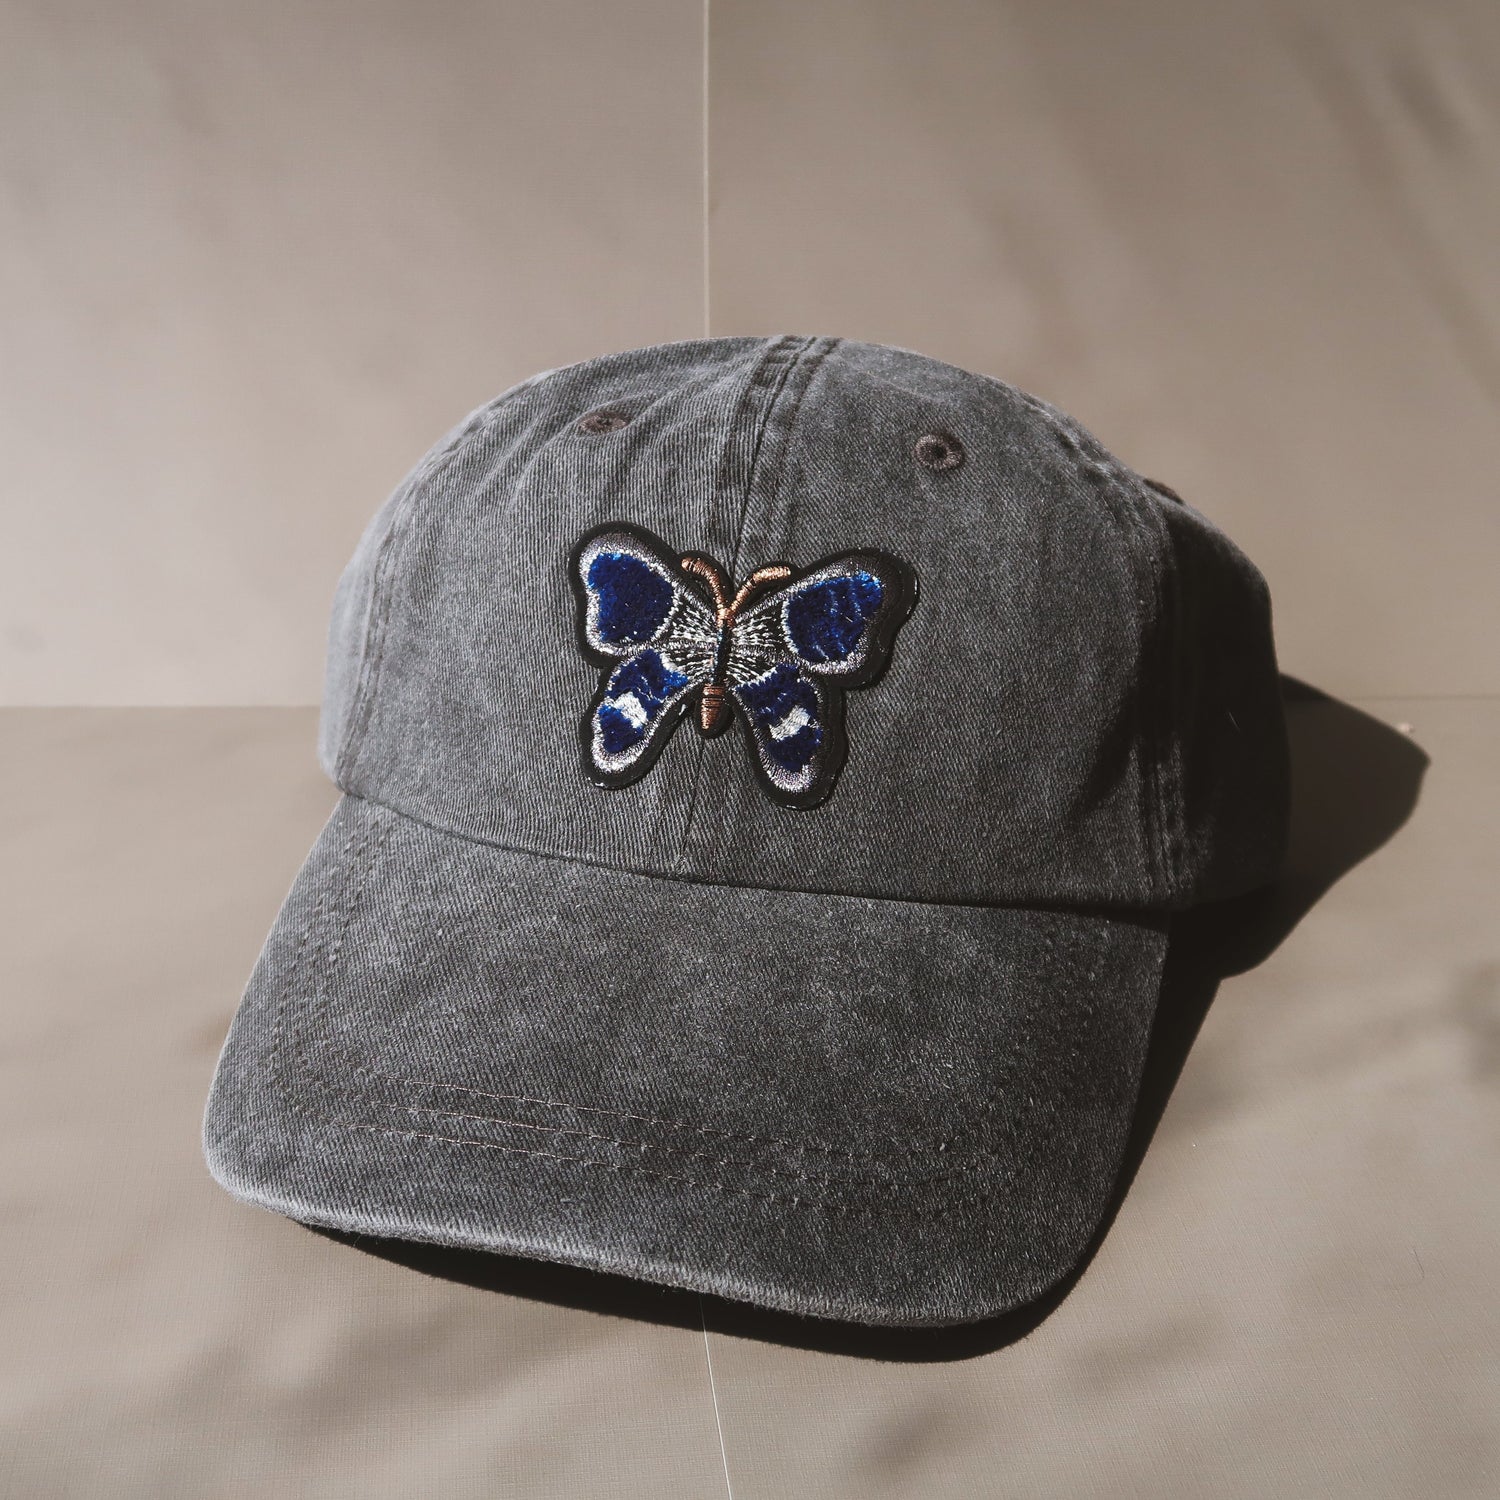 The Butterfly Baseball Cap is an essential washed cotton-twill baseball cap in vintage black. The perfect hat to elevate any casual look, whether running for coffee or any everyday adventure. #baseballcapforwomen #butterflybaseballcap #blackbaseballcap #womenbaseballcap #womenhat #butterflyhat